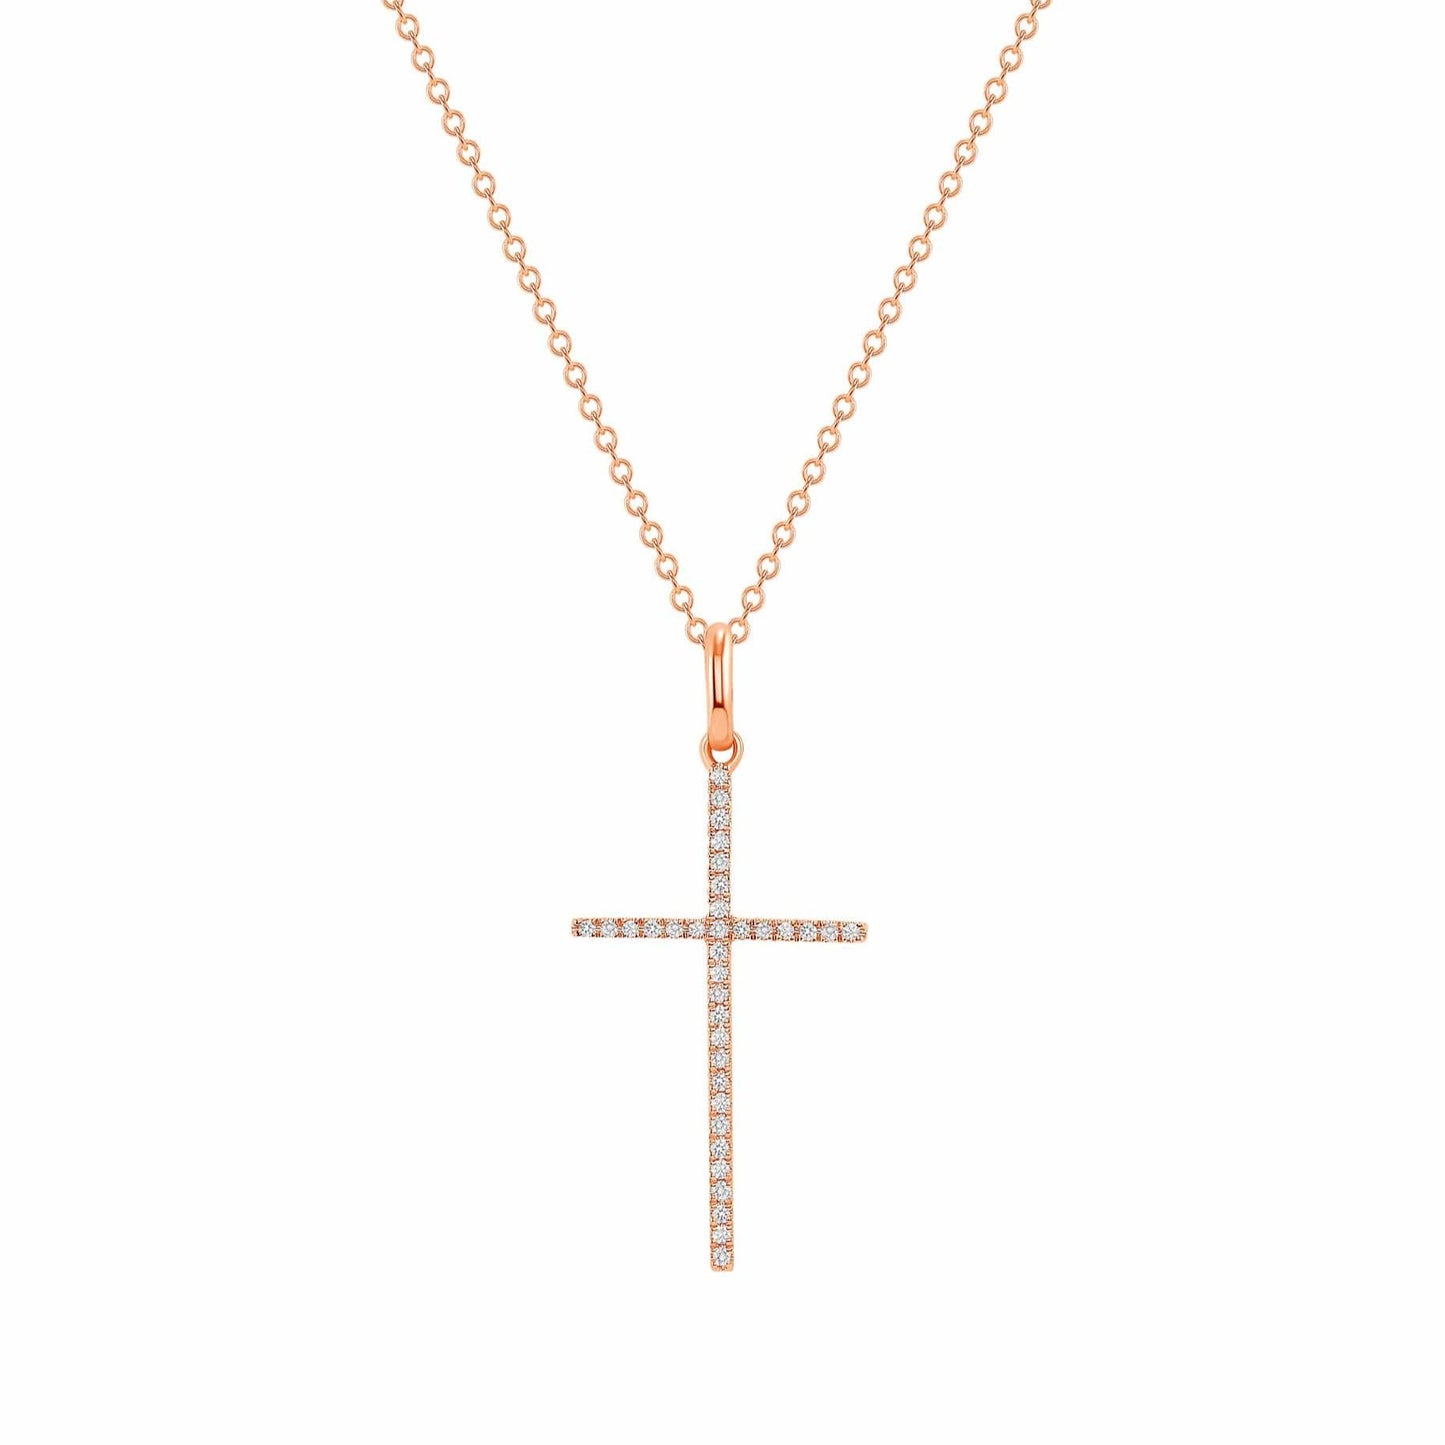 Silver Stainless Steel Tribal Cross Necklace – SpicyIce